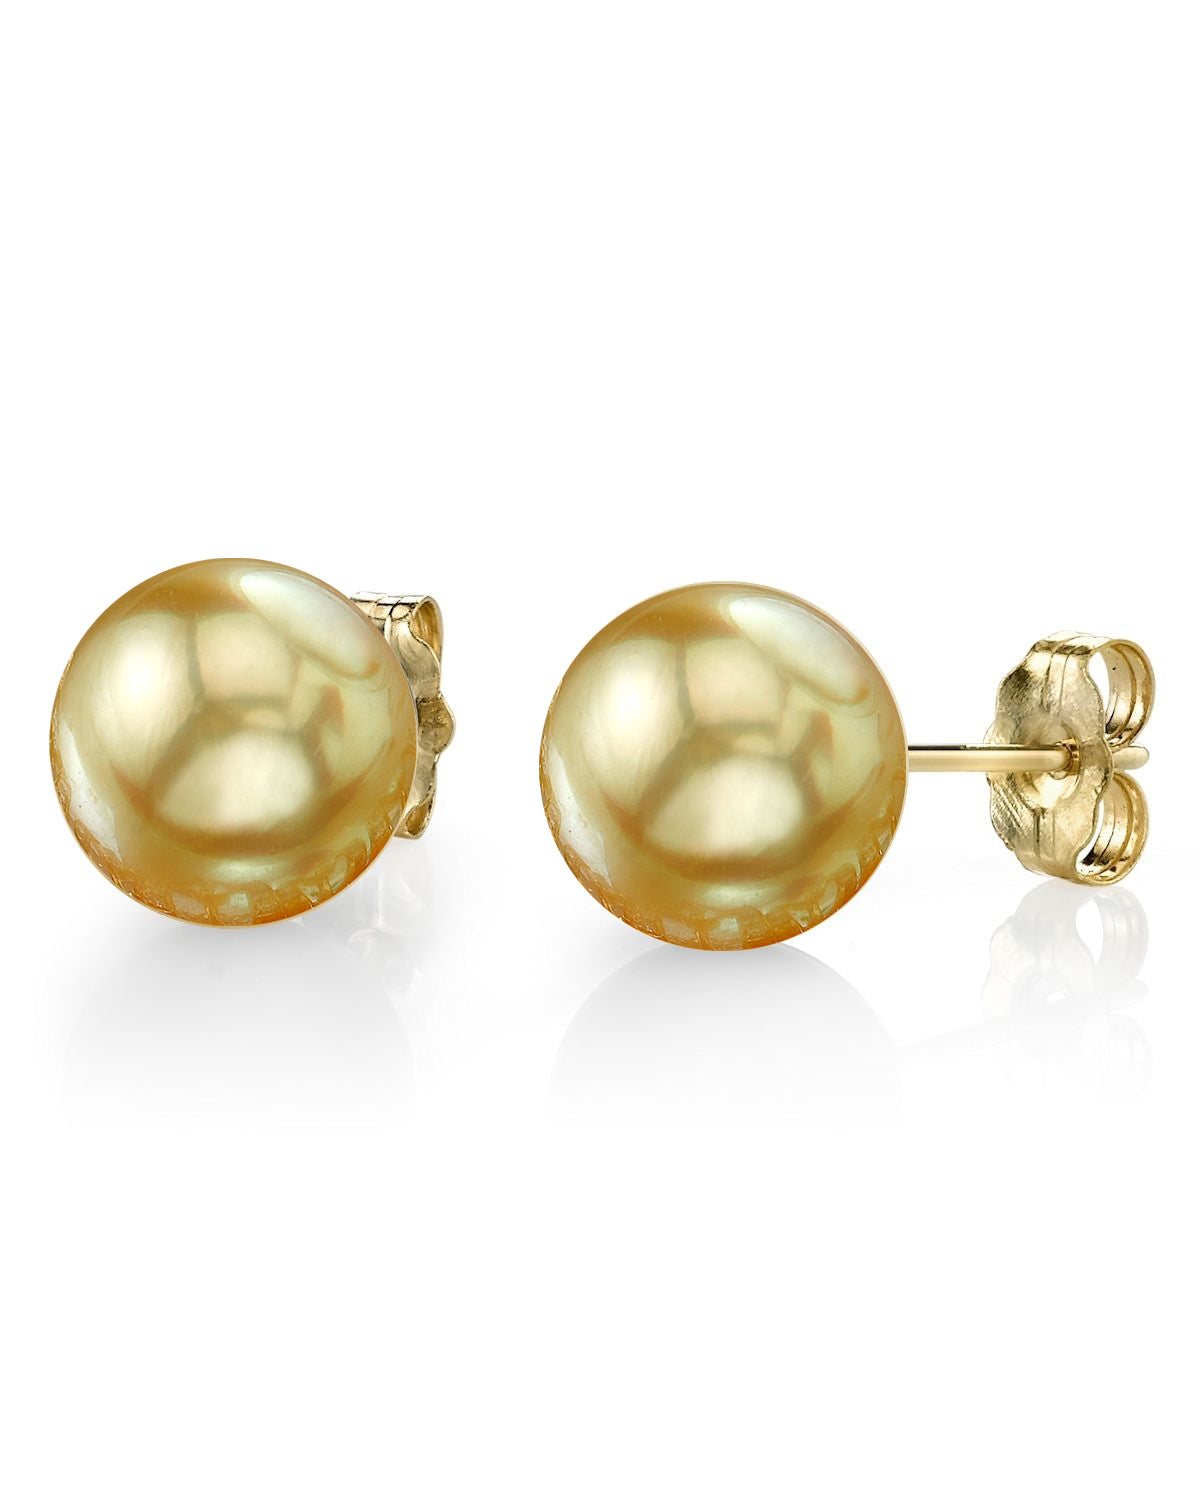 Golden South Sea Pearl Studs